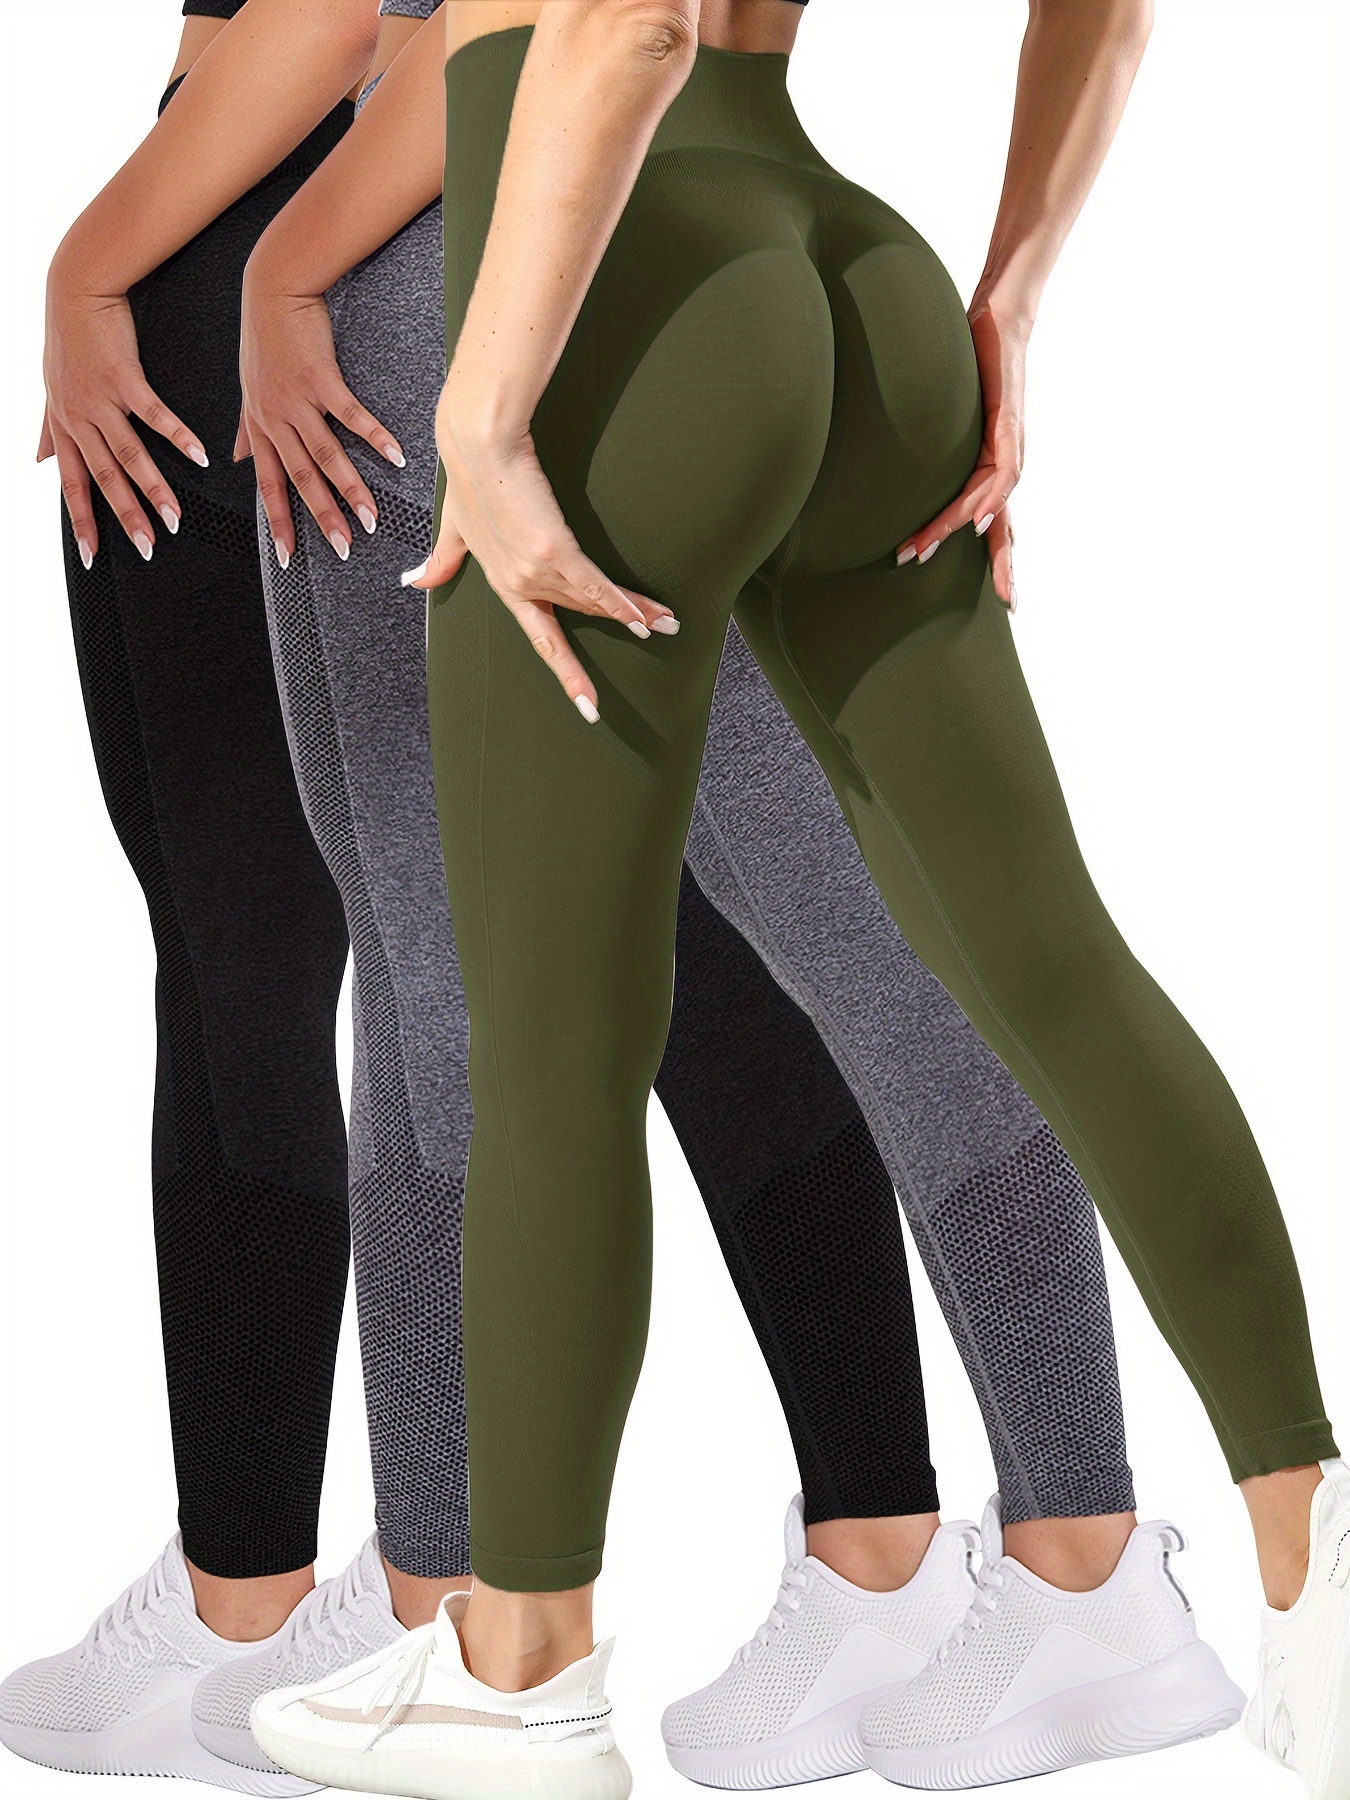 Workout Leggings for Women Sports Waist Yoga Stretch With Pockets Ladies  Pants High Pants Fitness Yoga Pants 